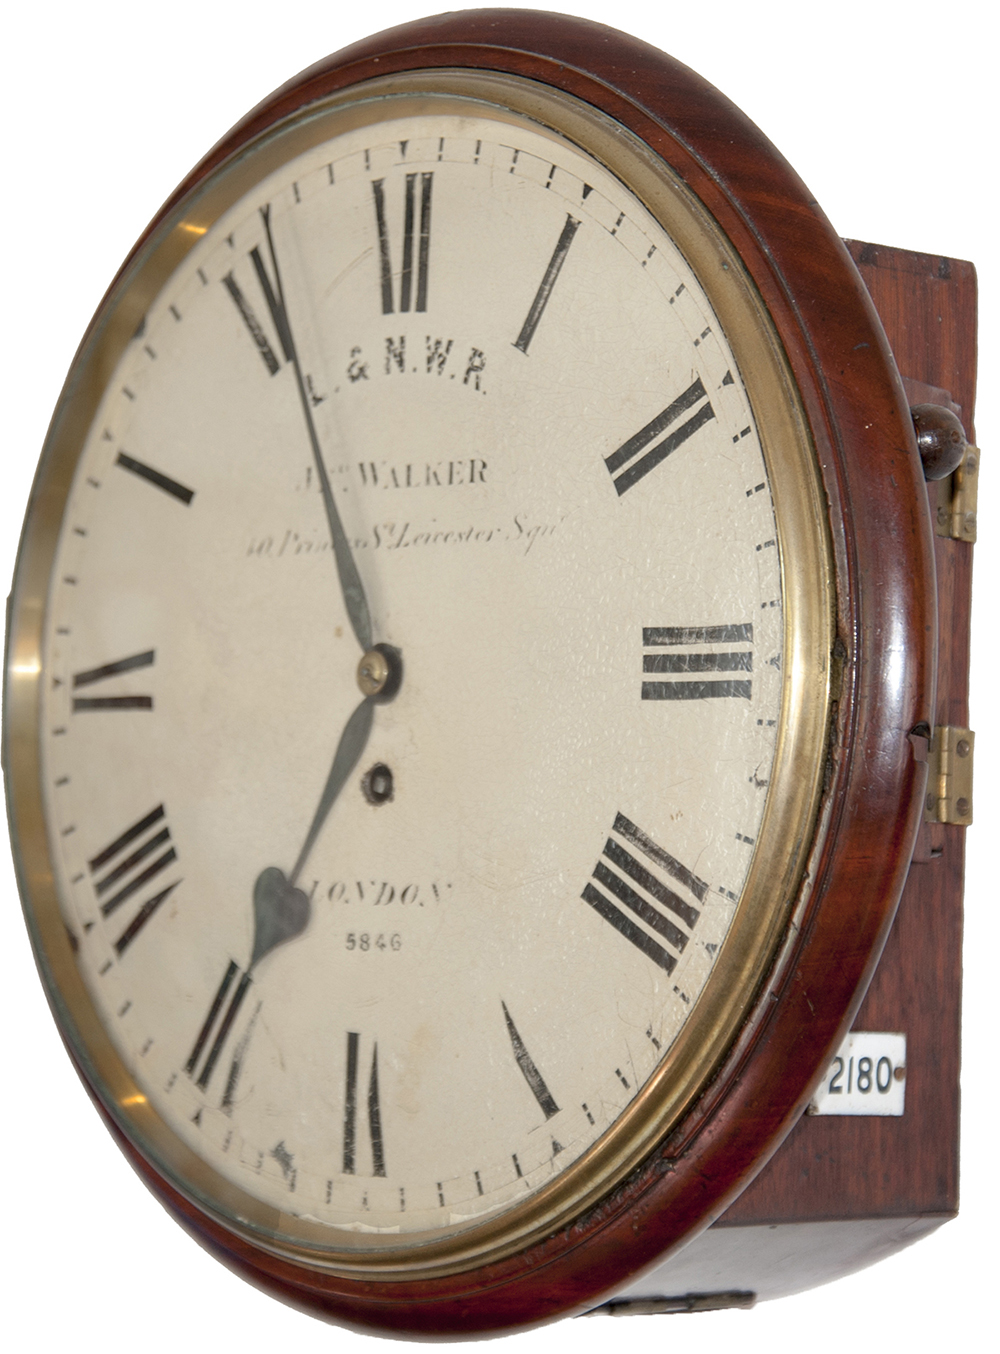 London and North Western Railway 12 inch dial mahogany cased fusee clock supplied to the LNWR around